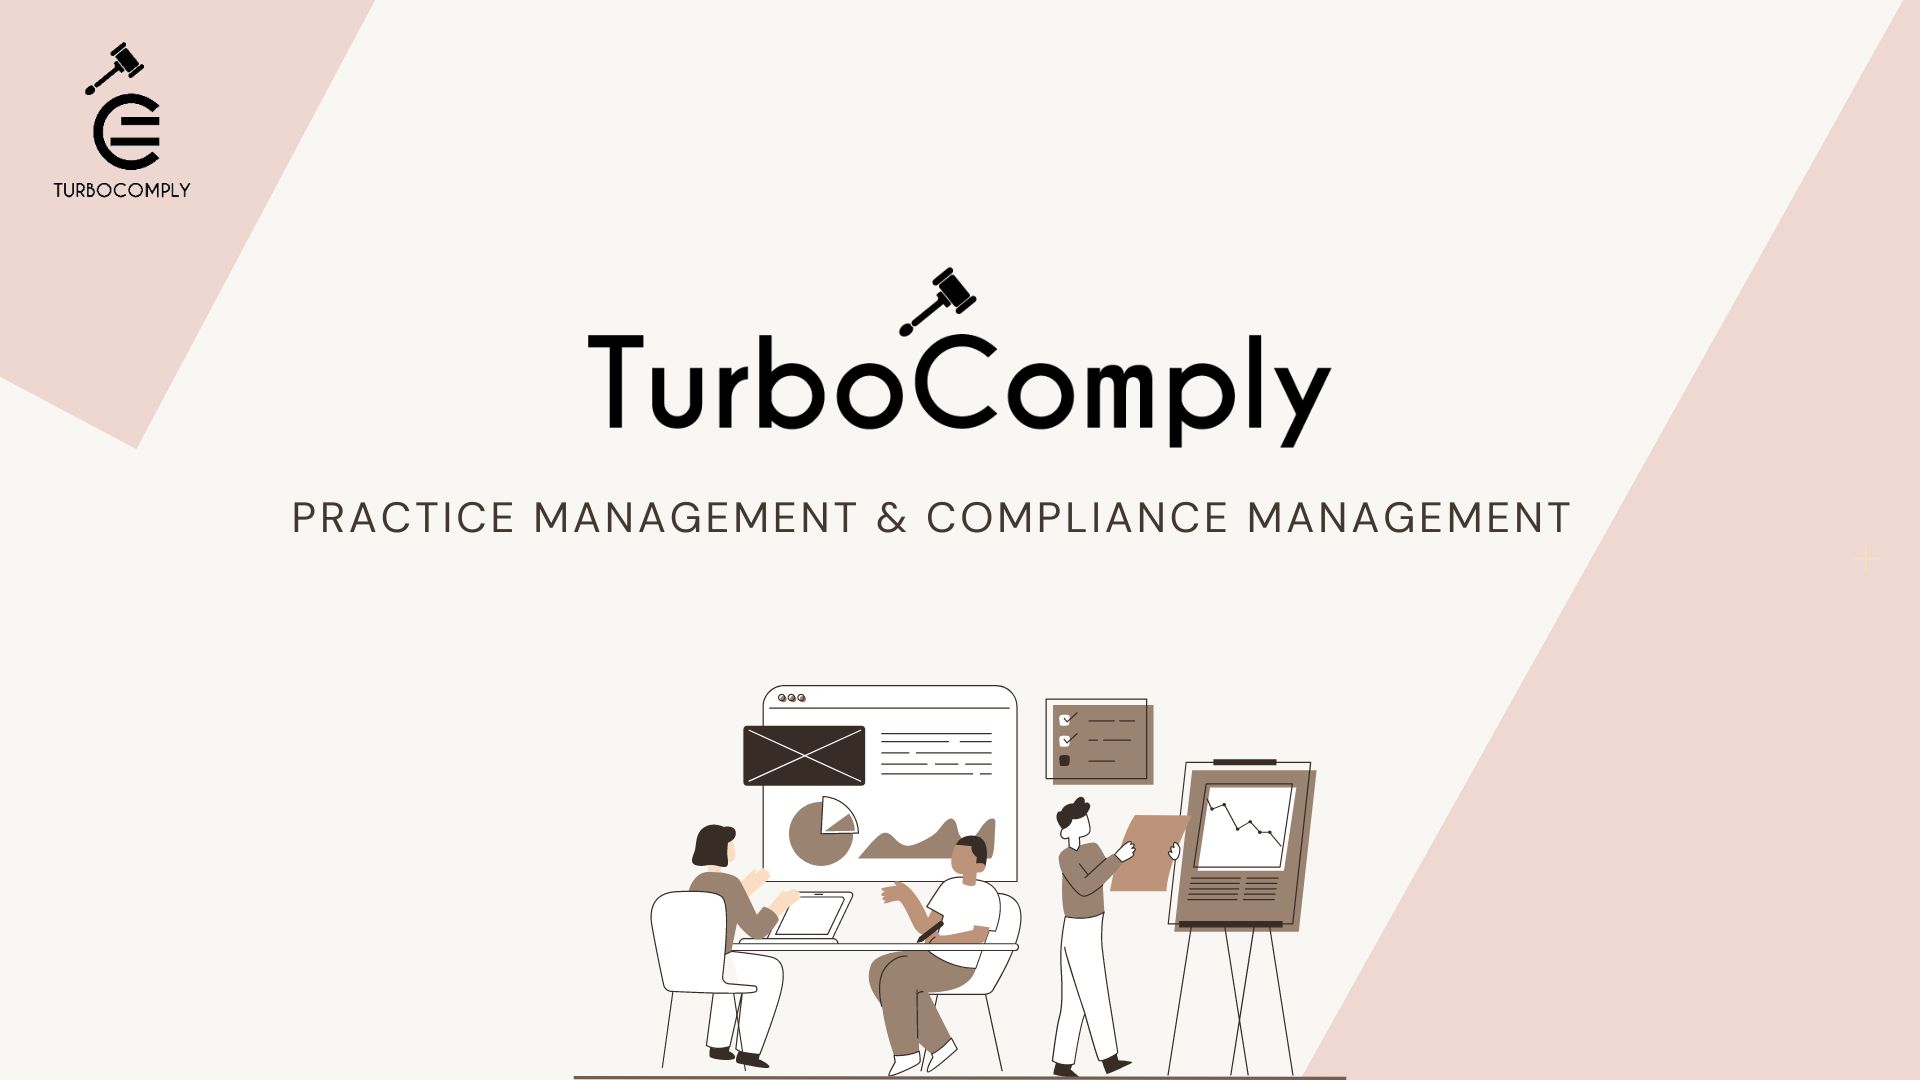 Compliance management tools & Turbocomply!